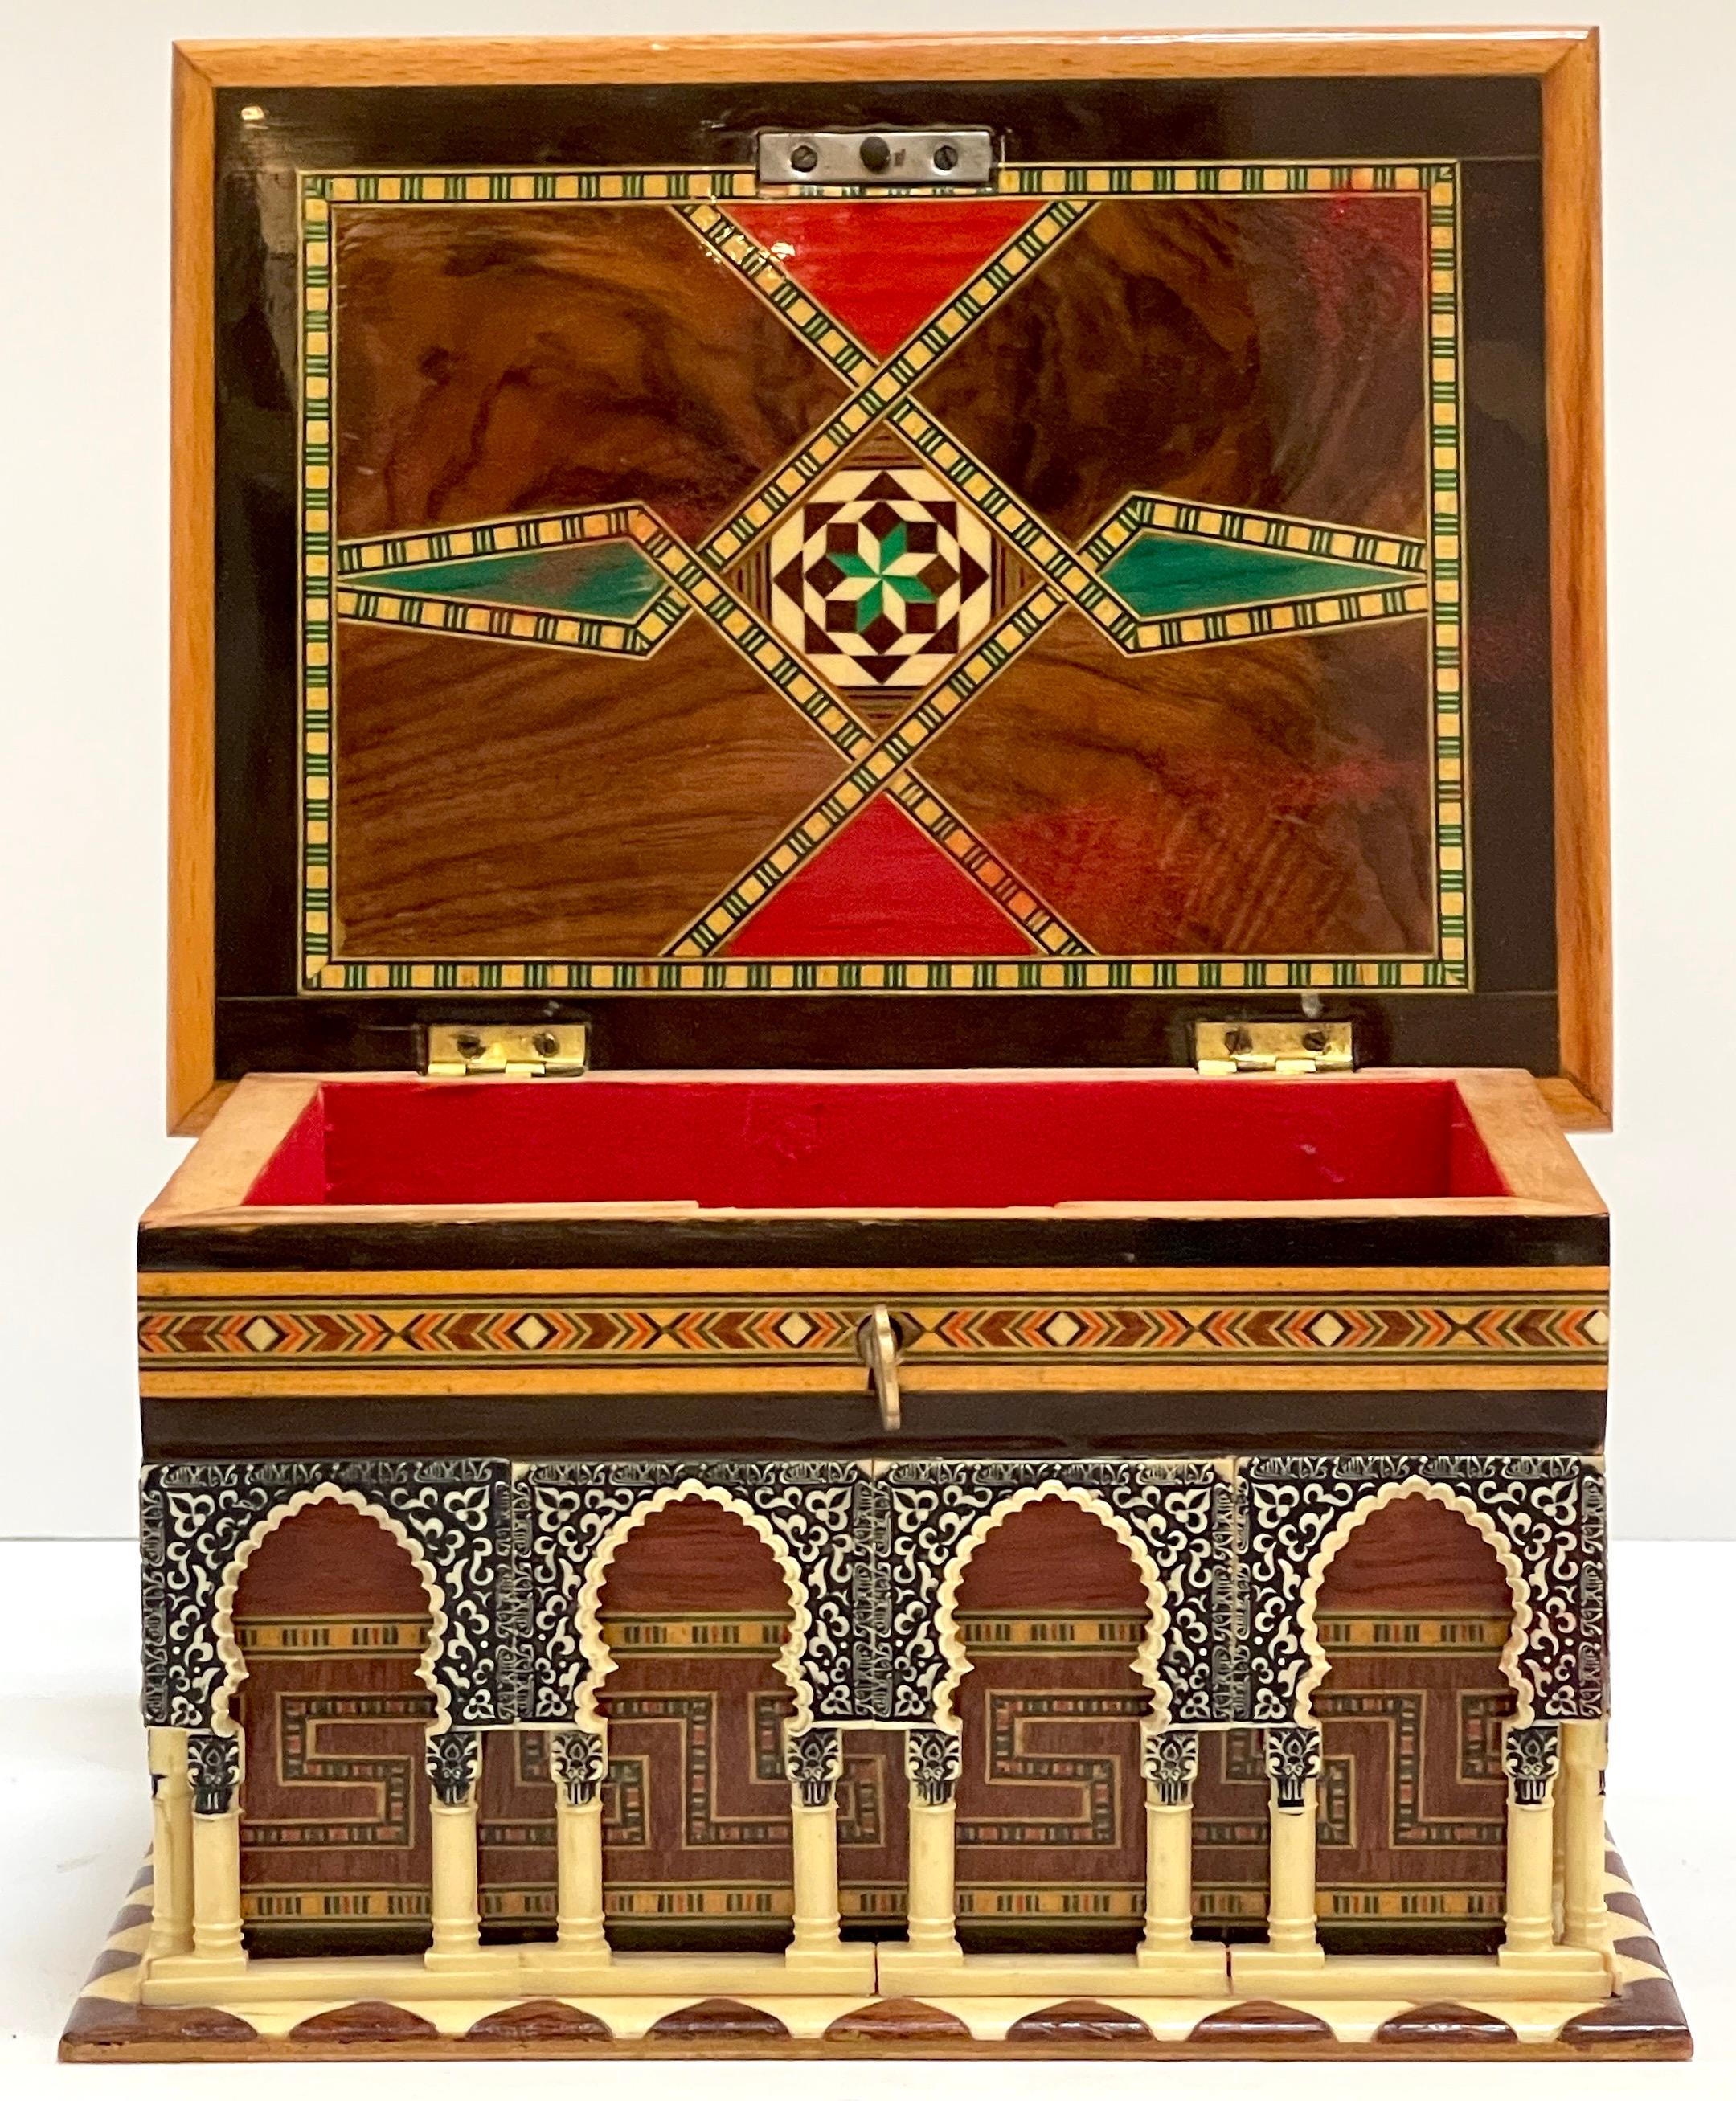 Moorish Architectural Model Box of the Alhambra Palace, with Key For Sale